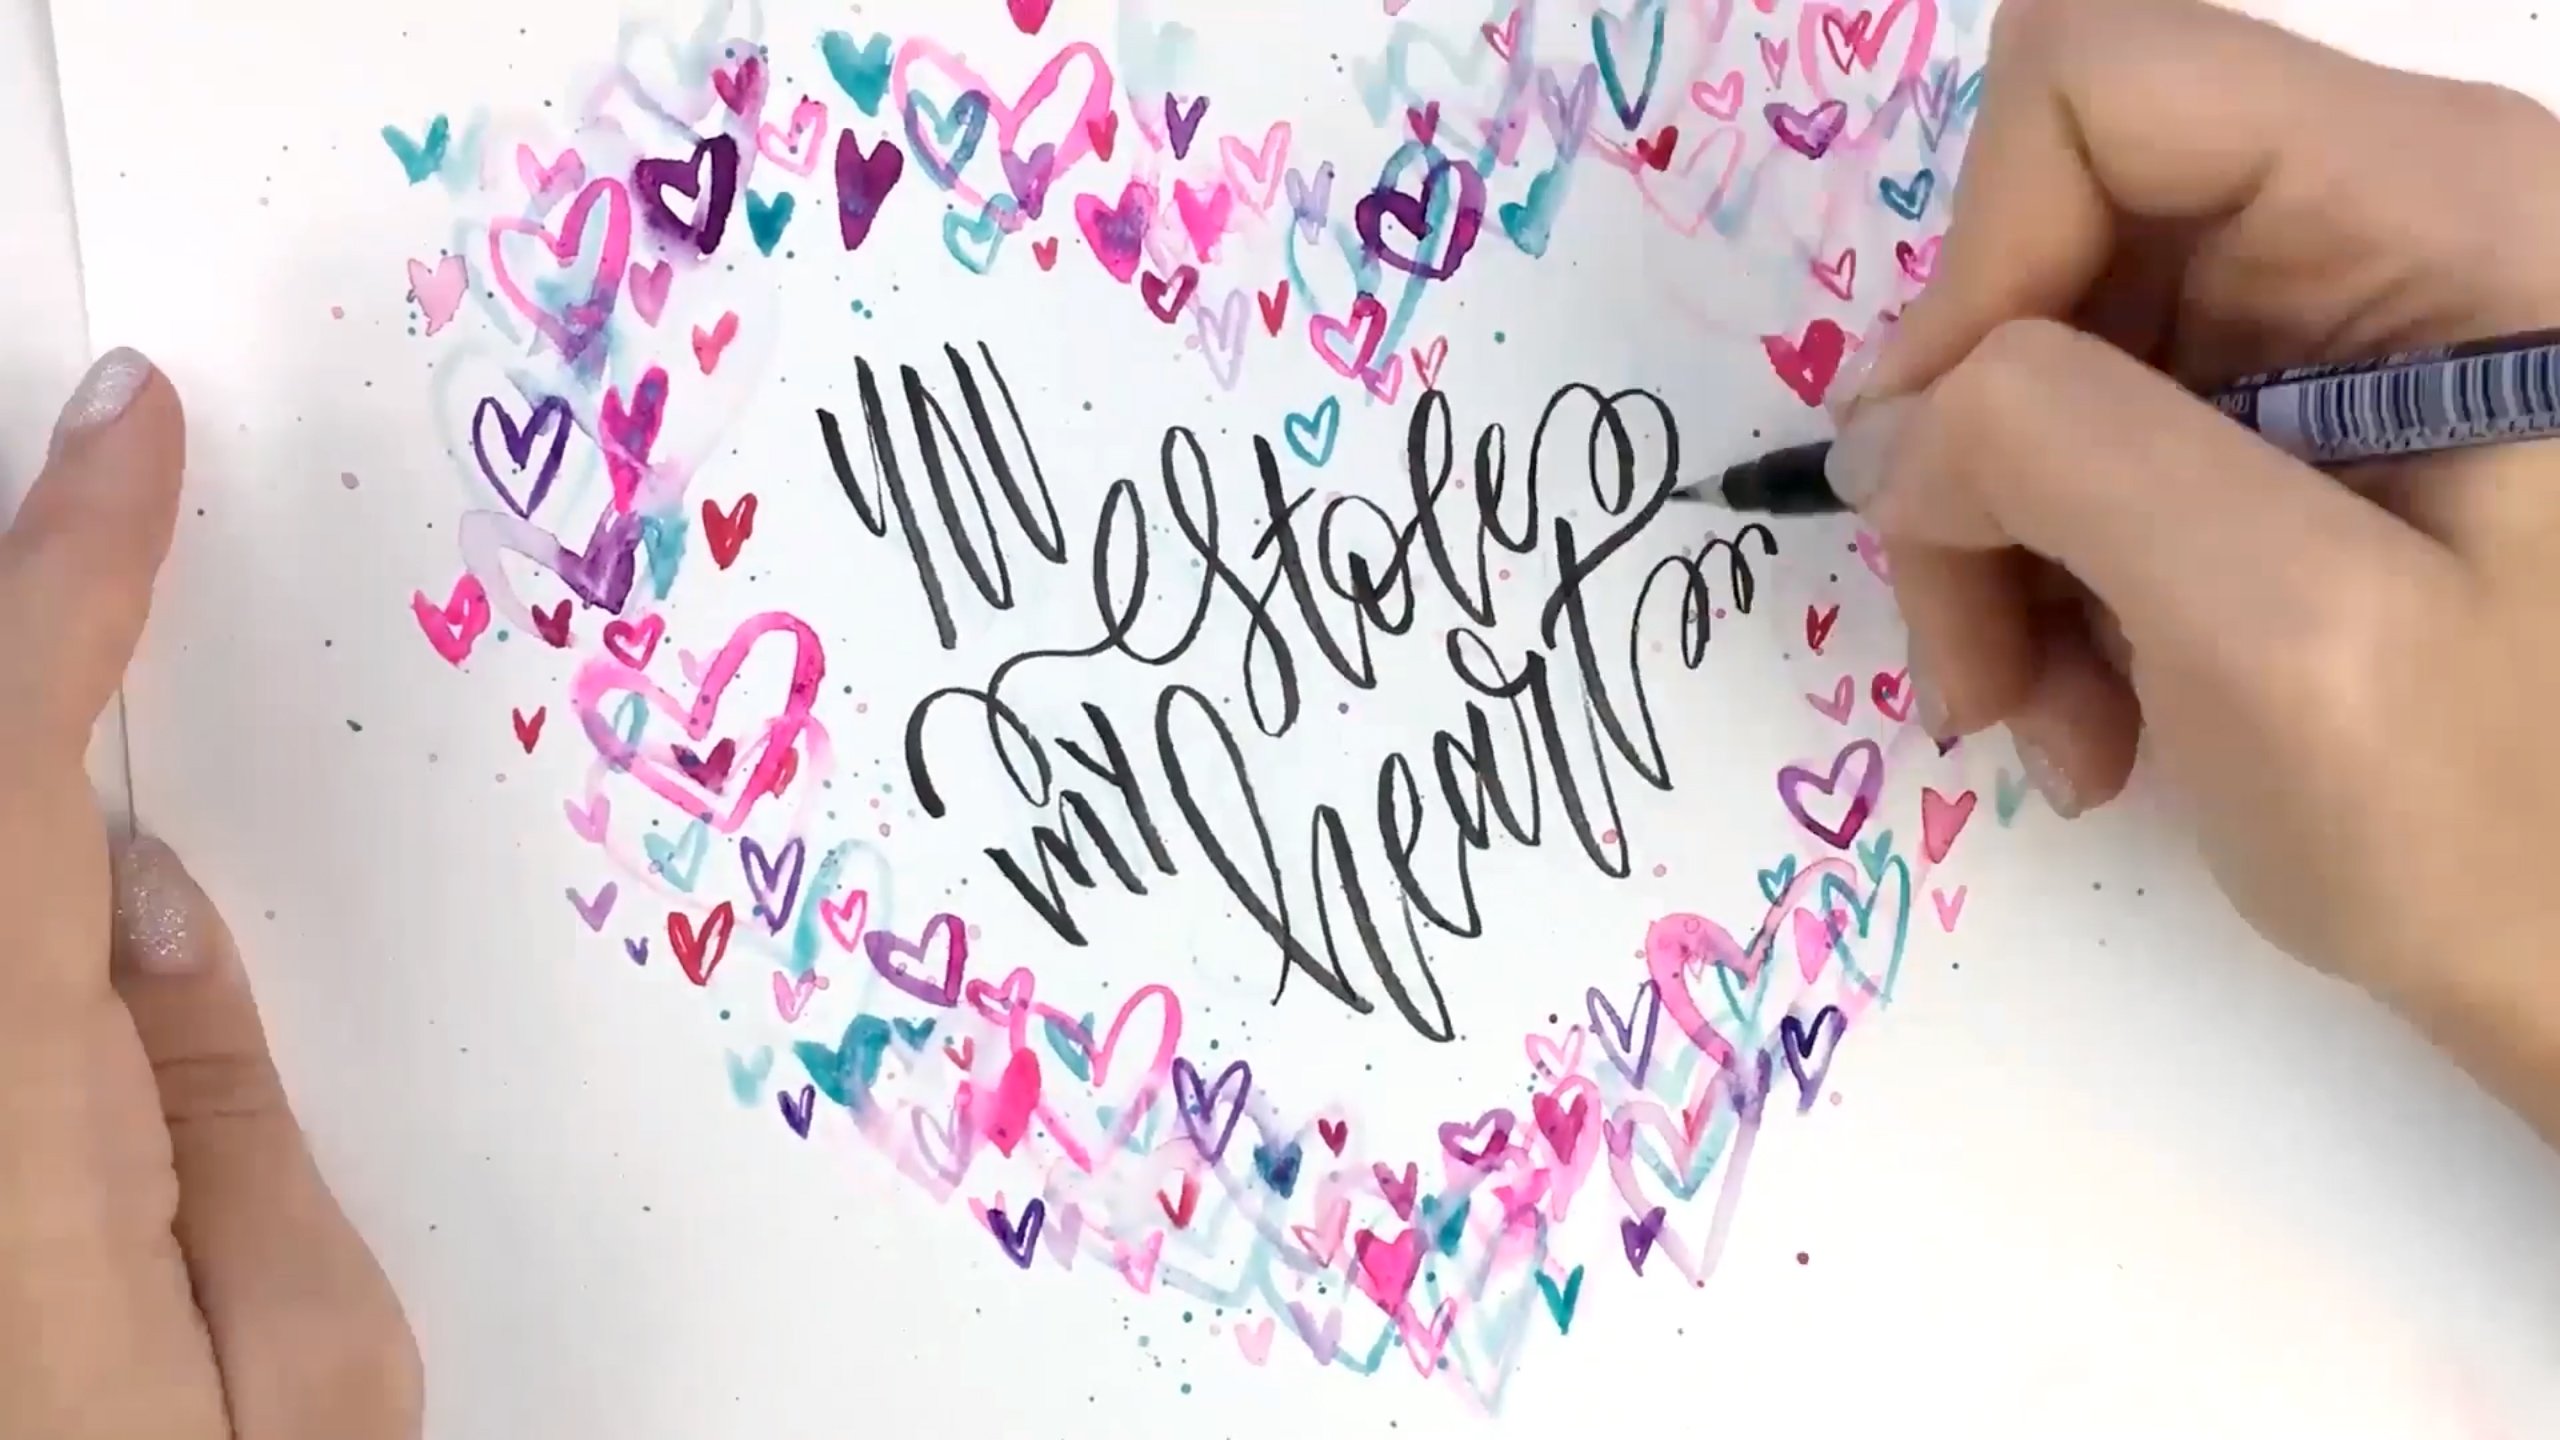 Anyone Can Brush Letter: Easy Modern Calligraphy For Complete Beginners -  Design Cuts